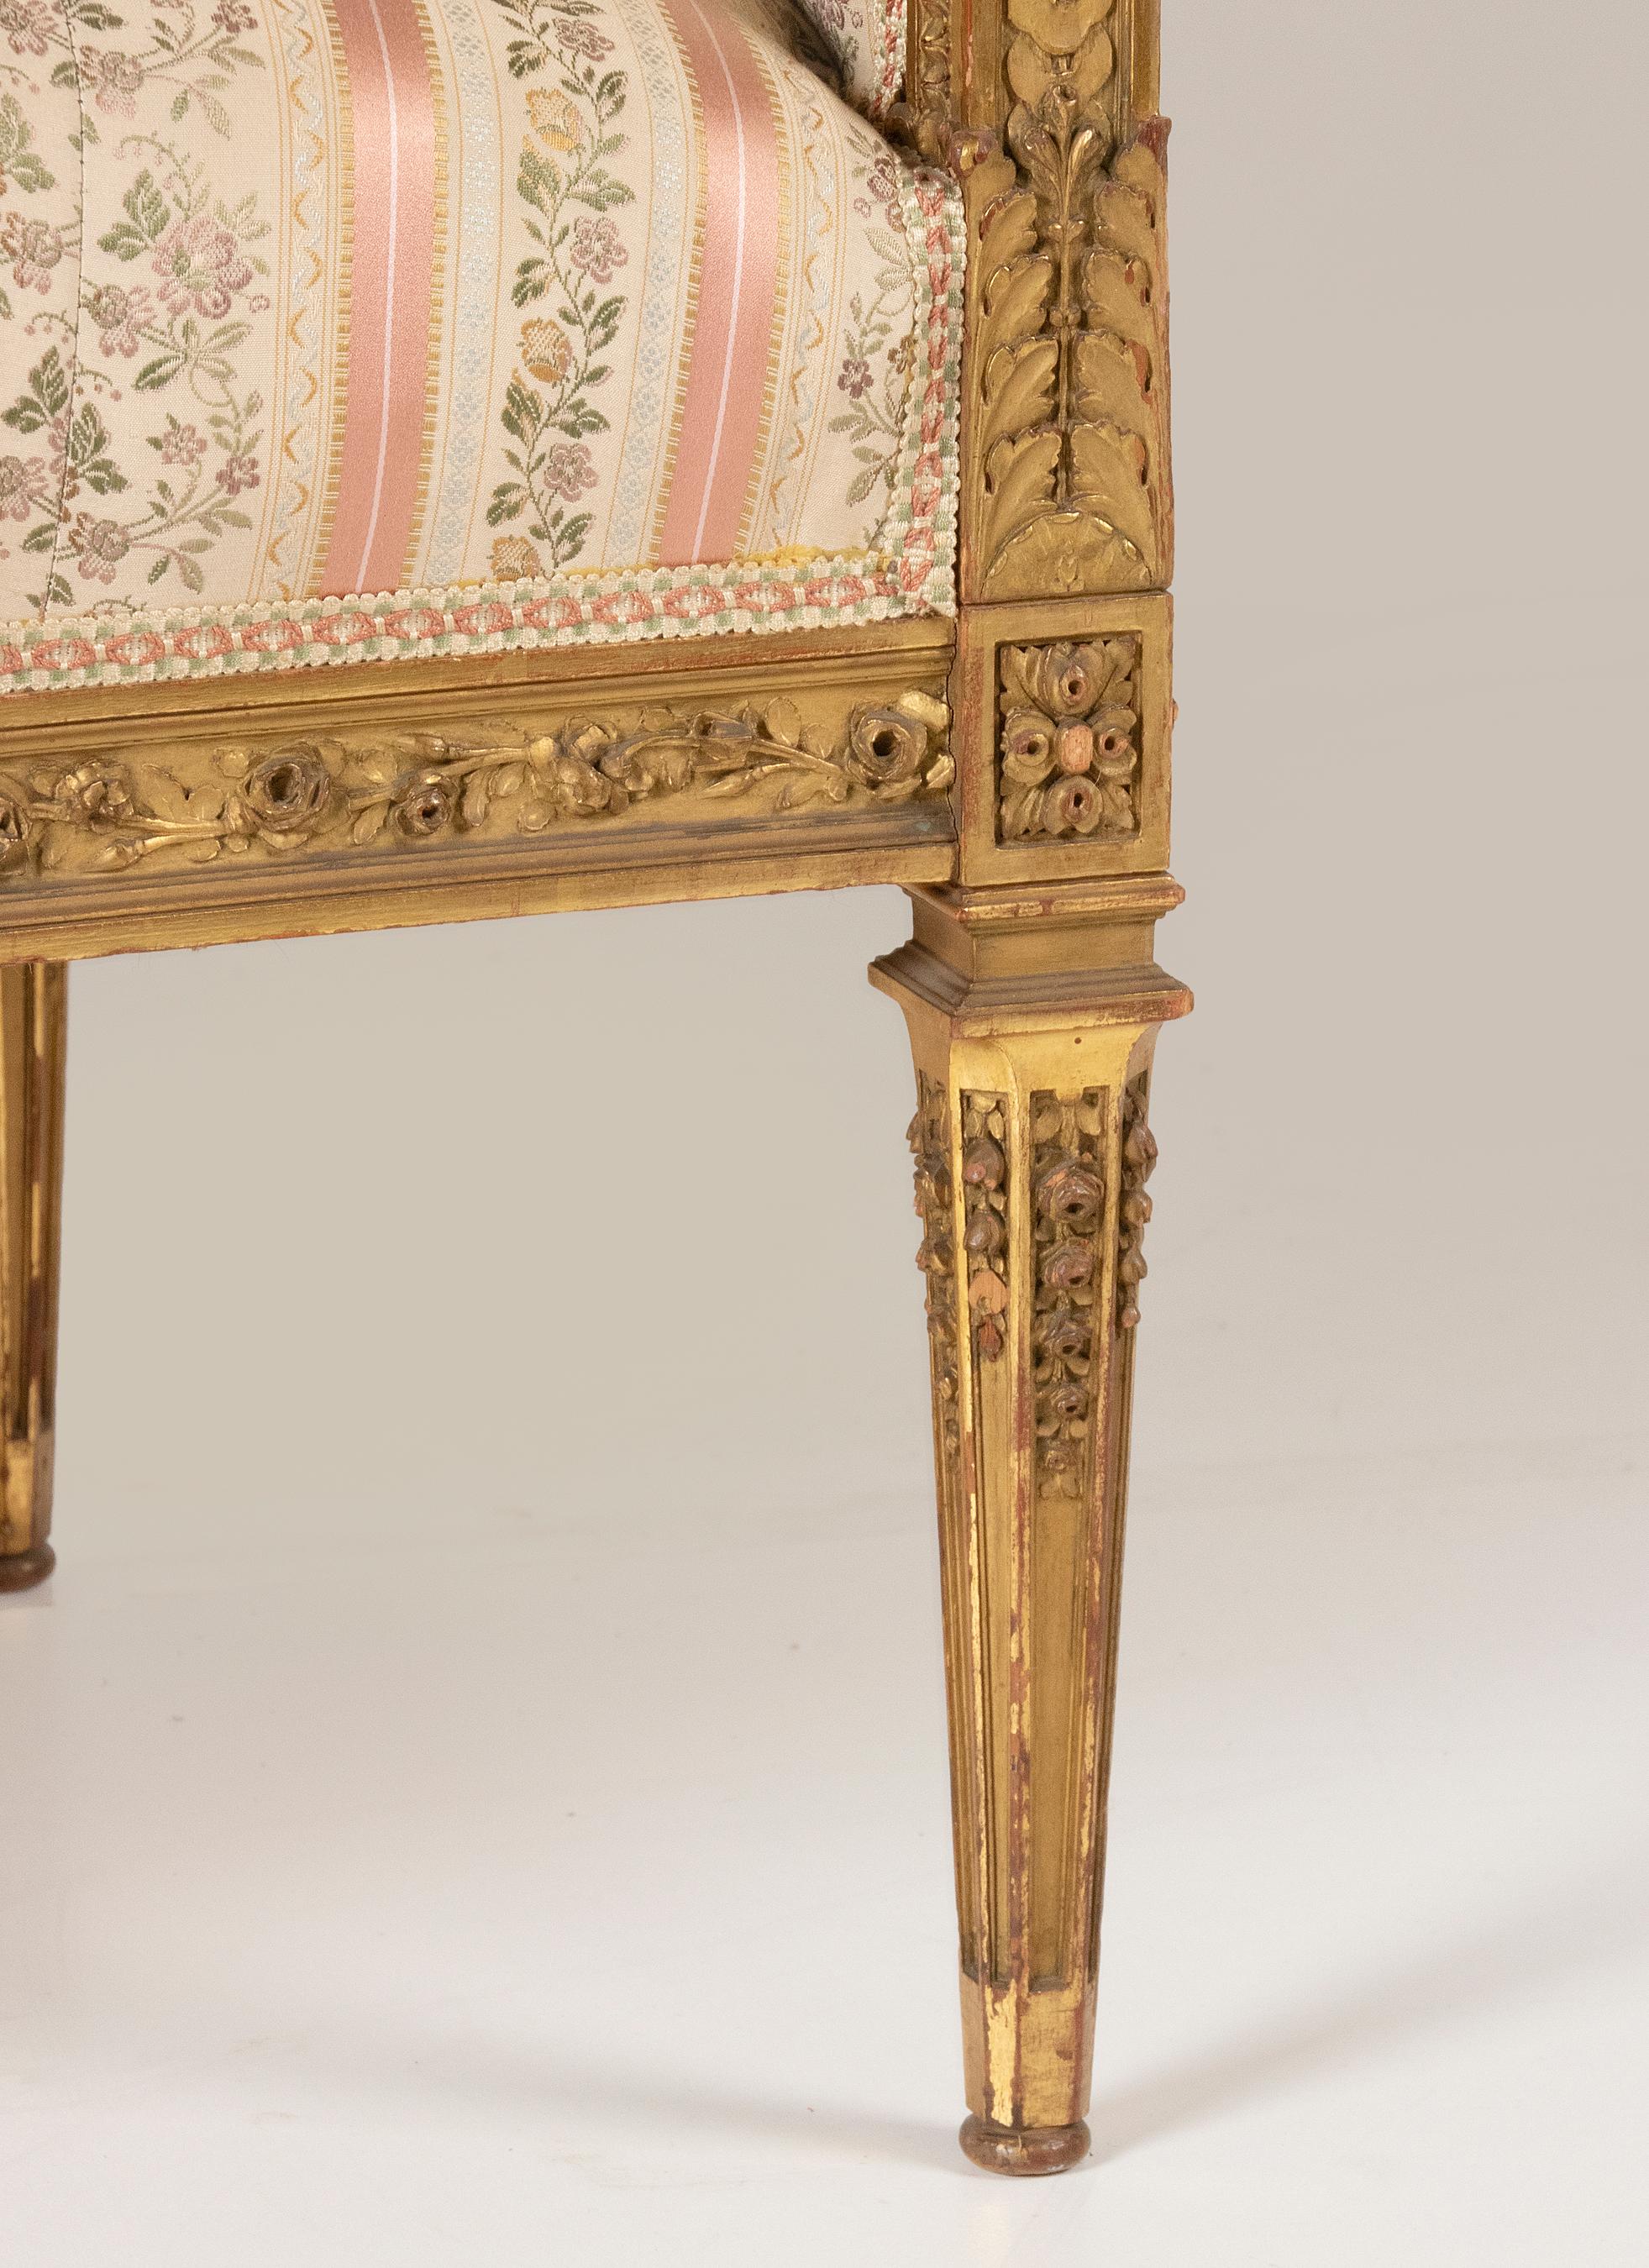 Gold Leaf 19th Century Wooden and Gilded Salon Suite Louis XVI-Style